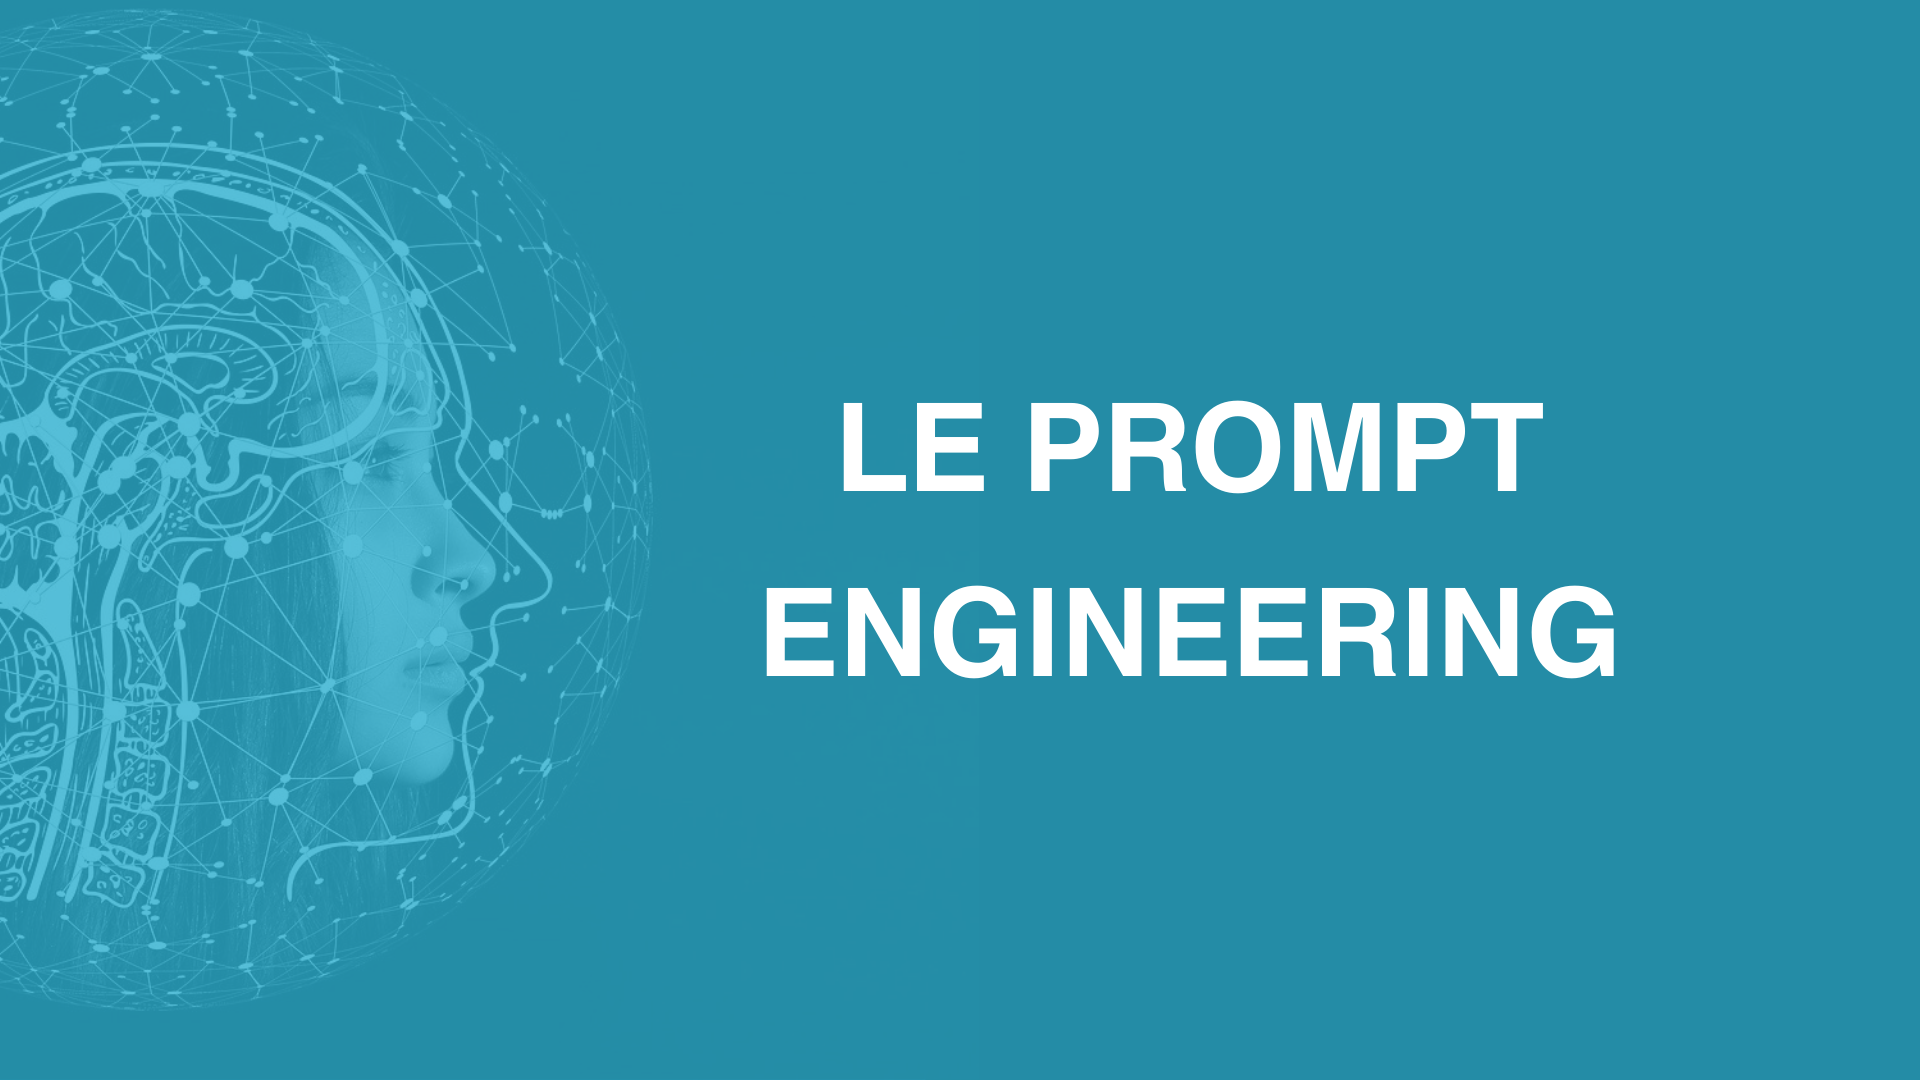 Le Prompt Engineering.